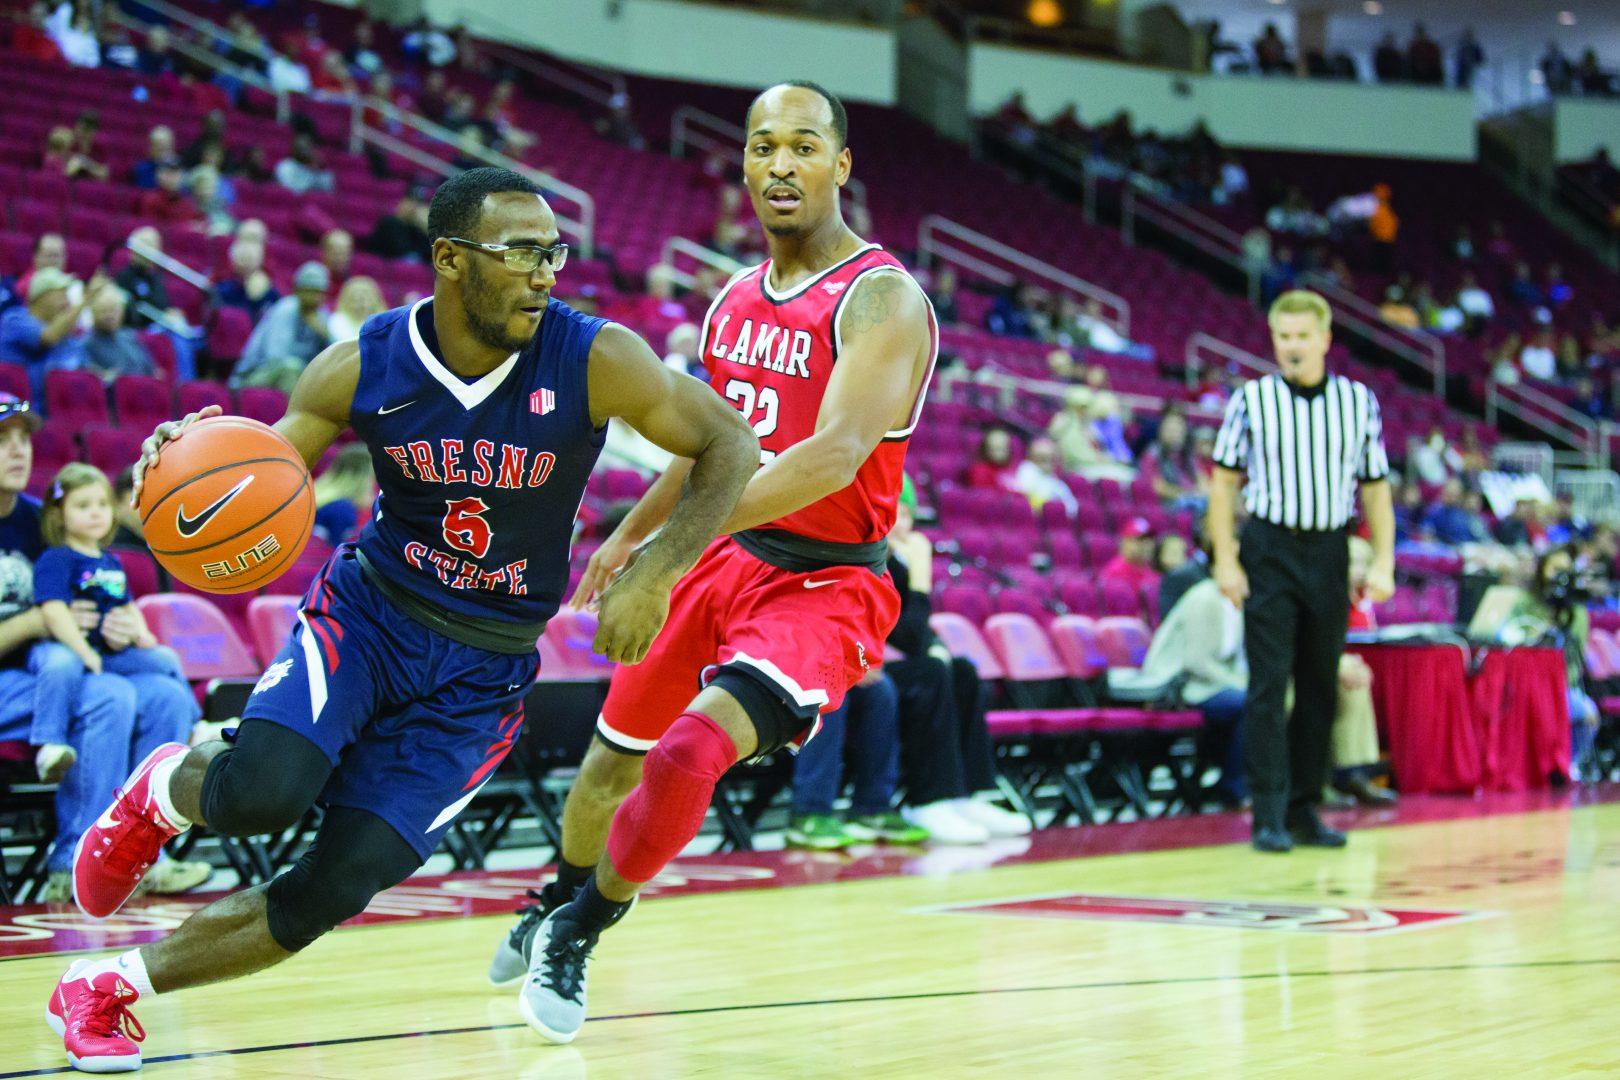 Fresno State junior guard Jammel Taylor (#5) dribbles past Lamar junior guard Joey Frenchwood (#32) on Saturday at the Save Mart Center. (Christian Ortuno/The Collegian)